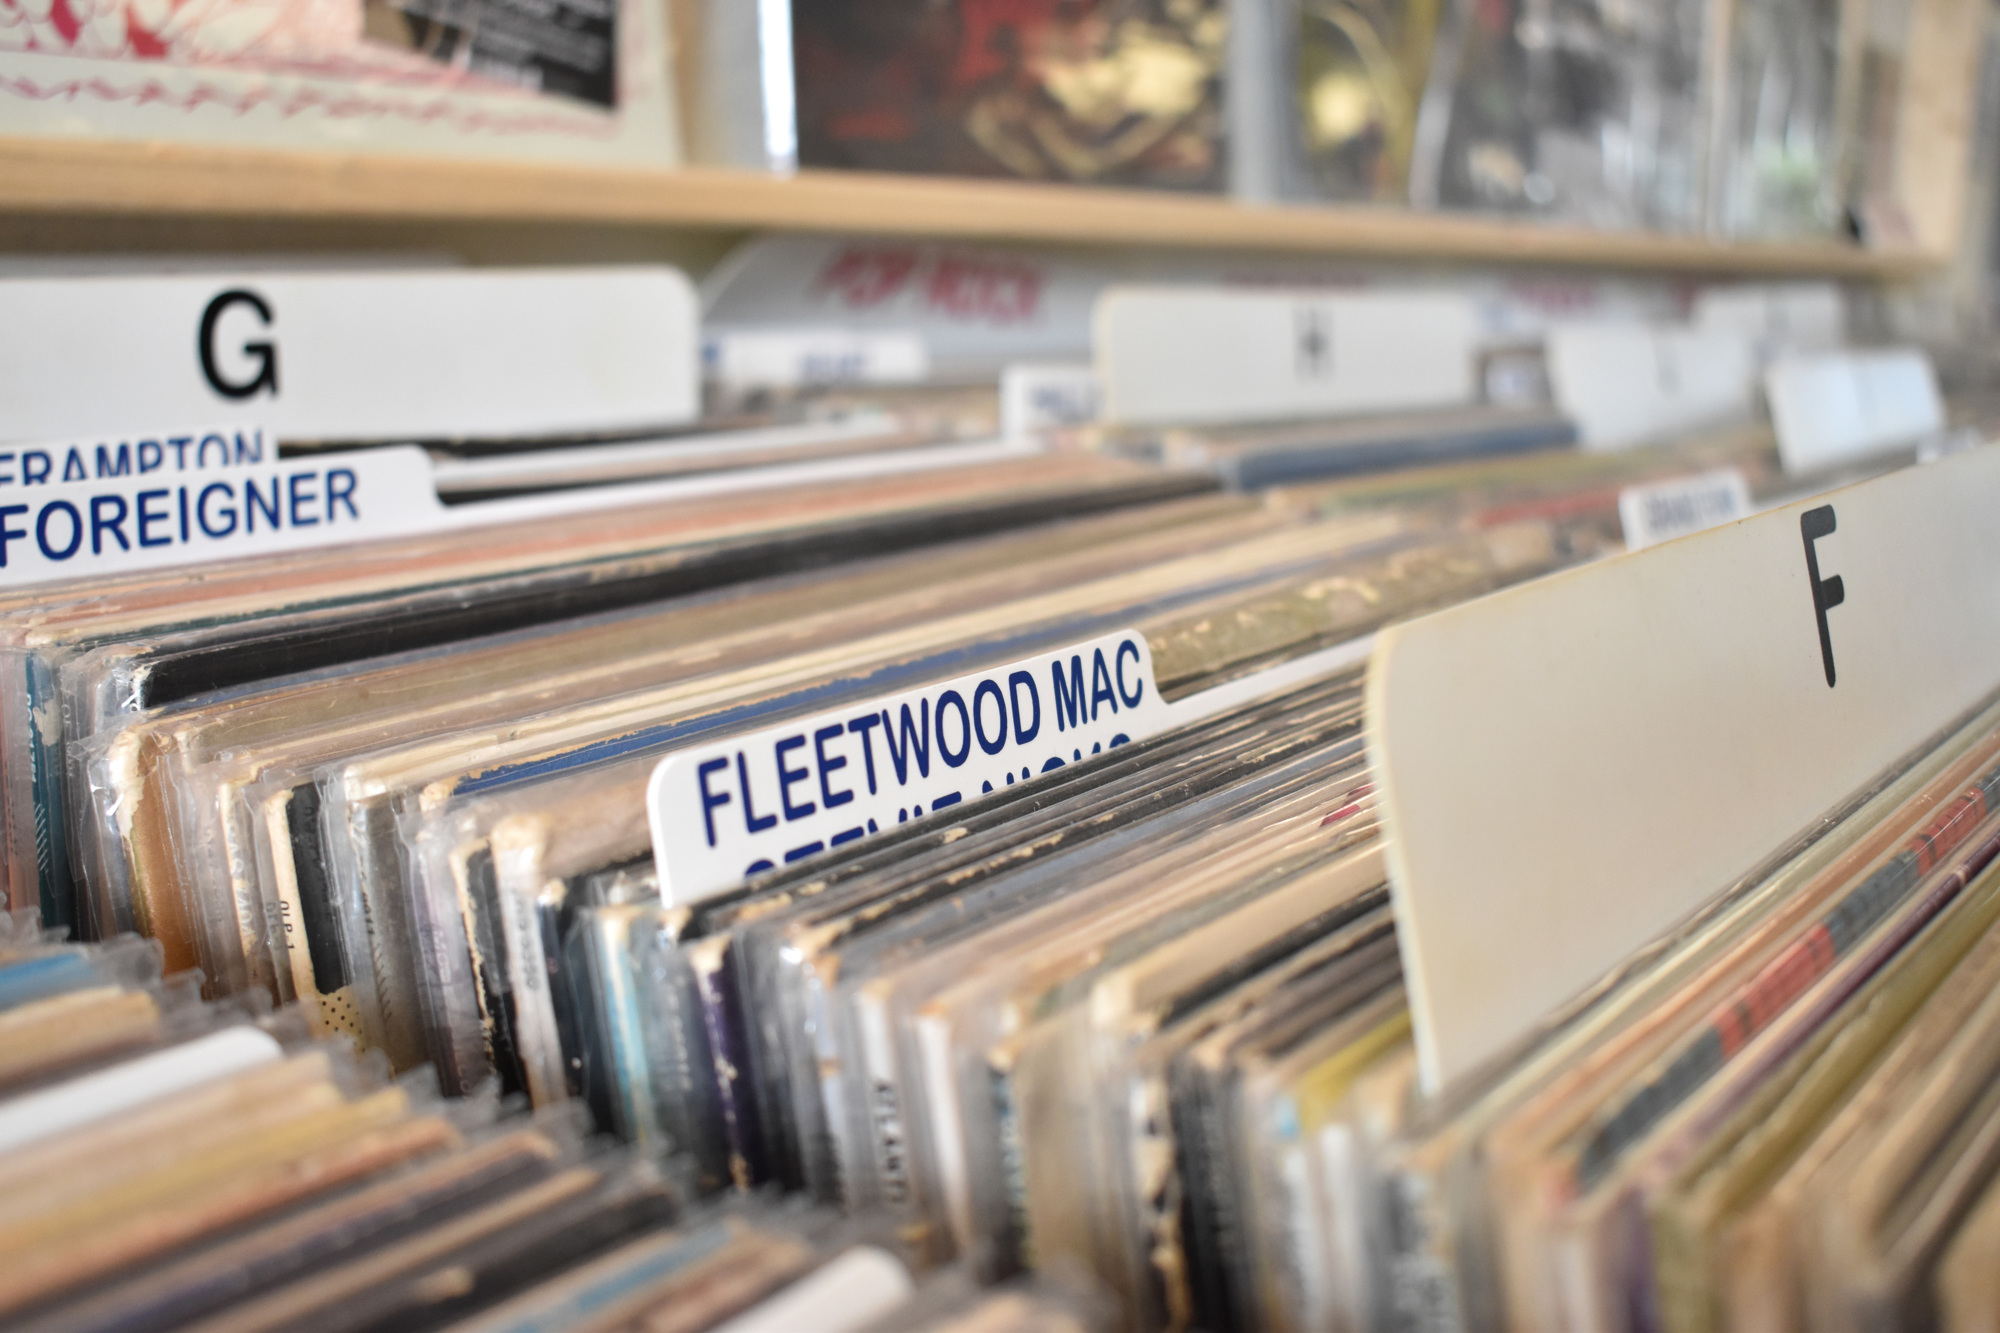 The store features everything from Fleetwood Mac to Taylor Swift. Photo by Niki Kottmann